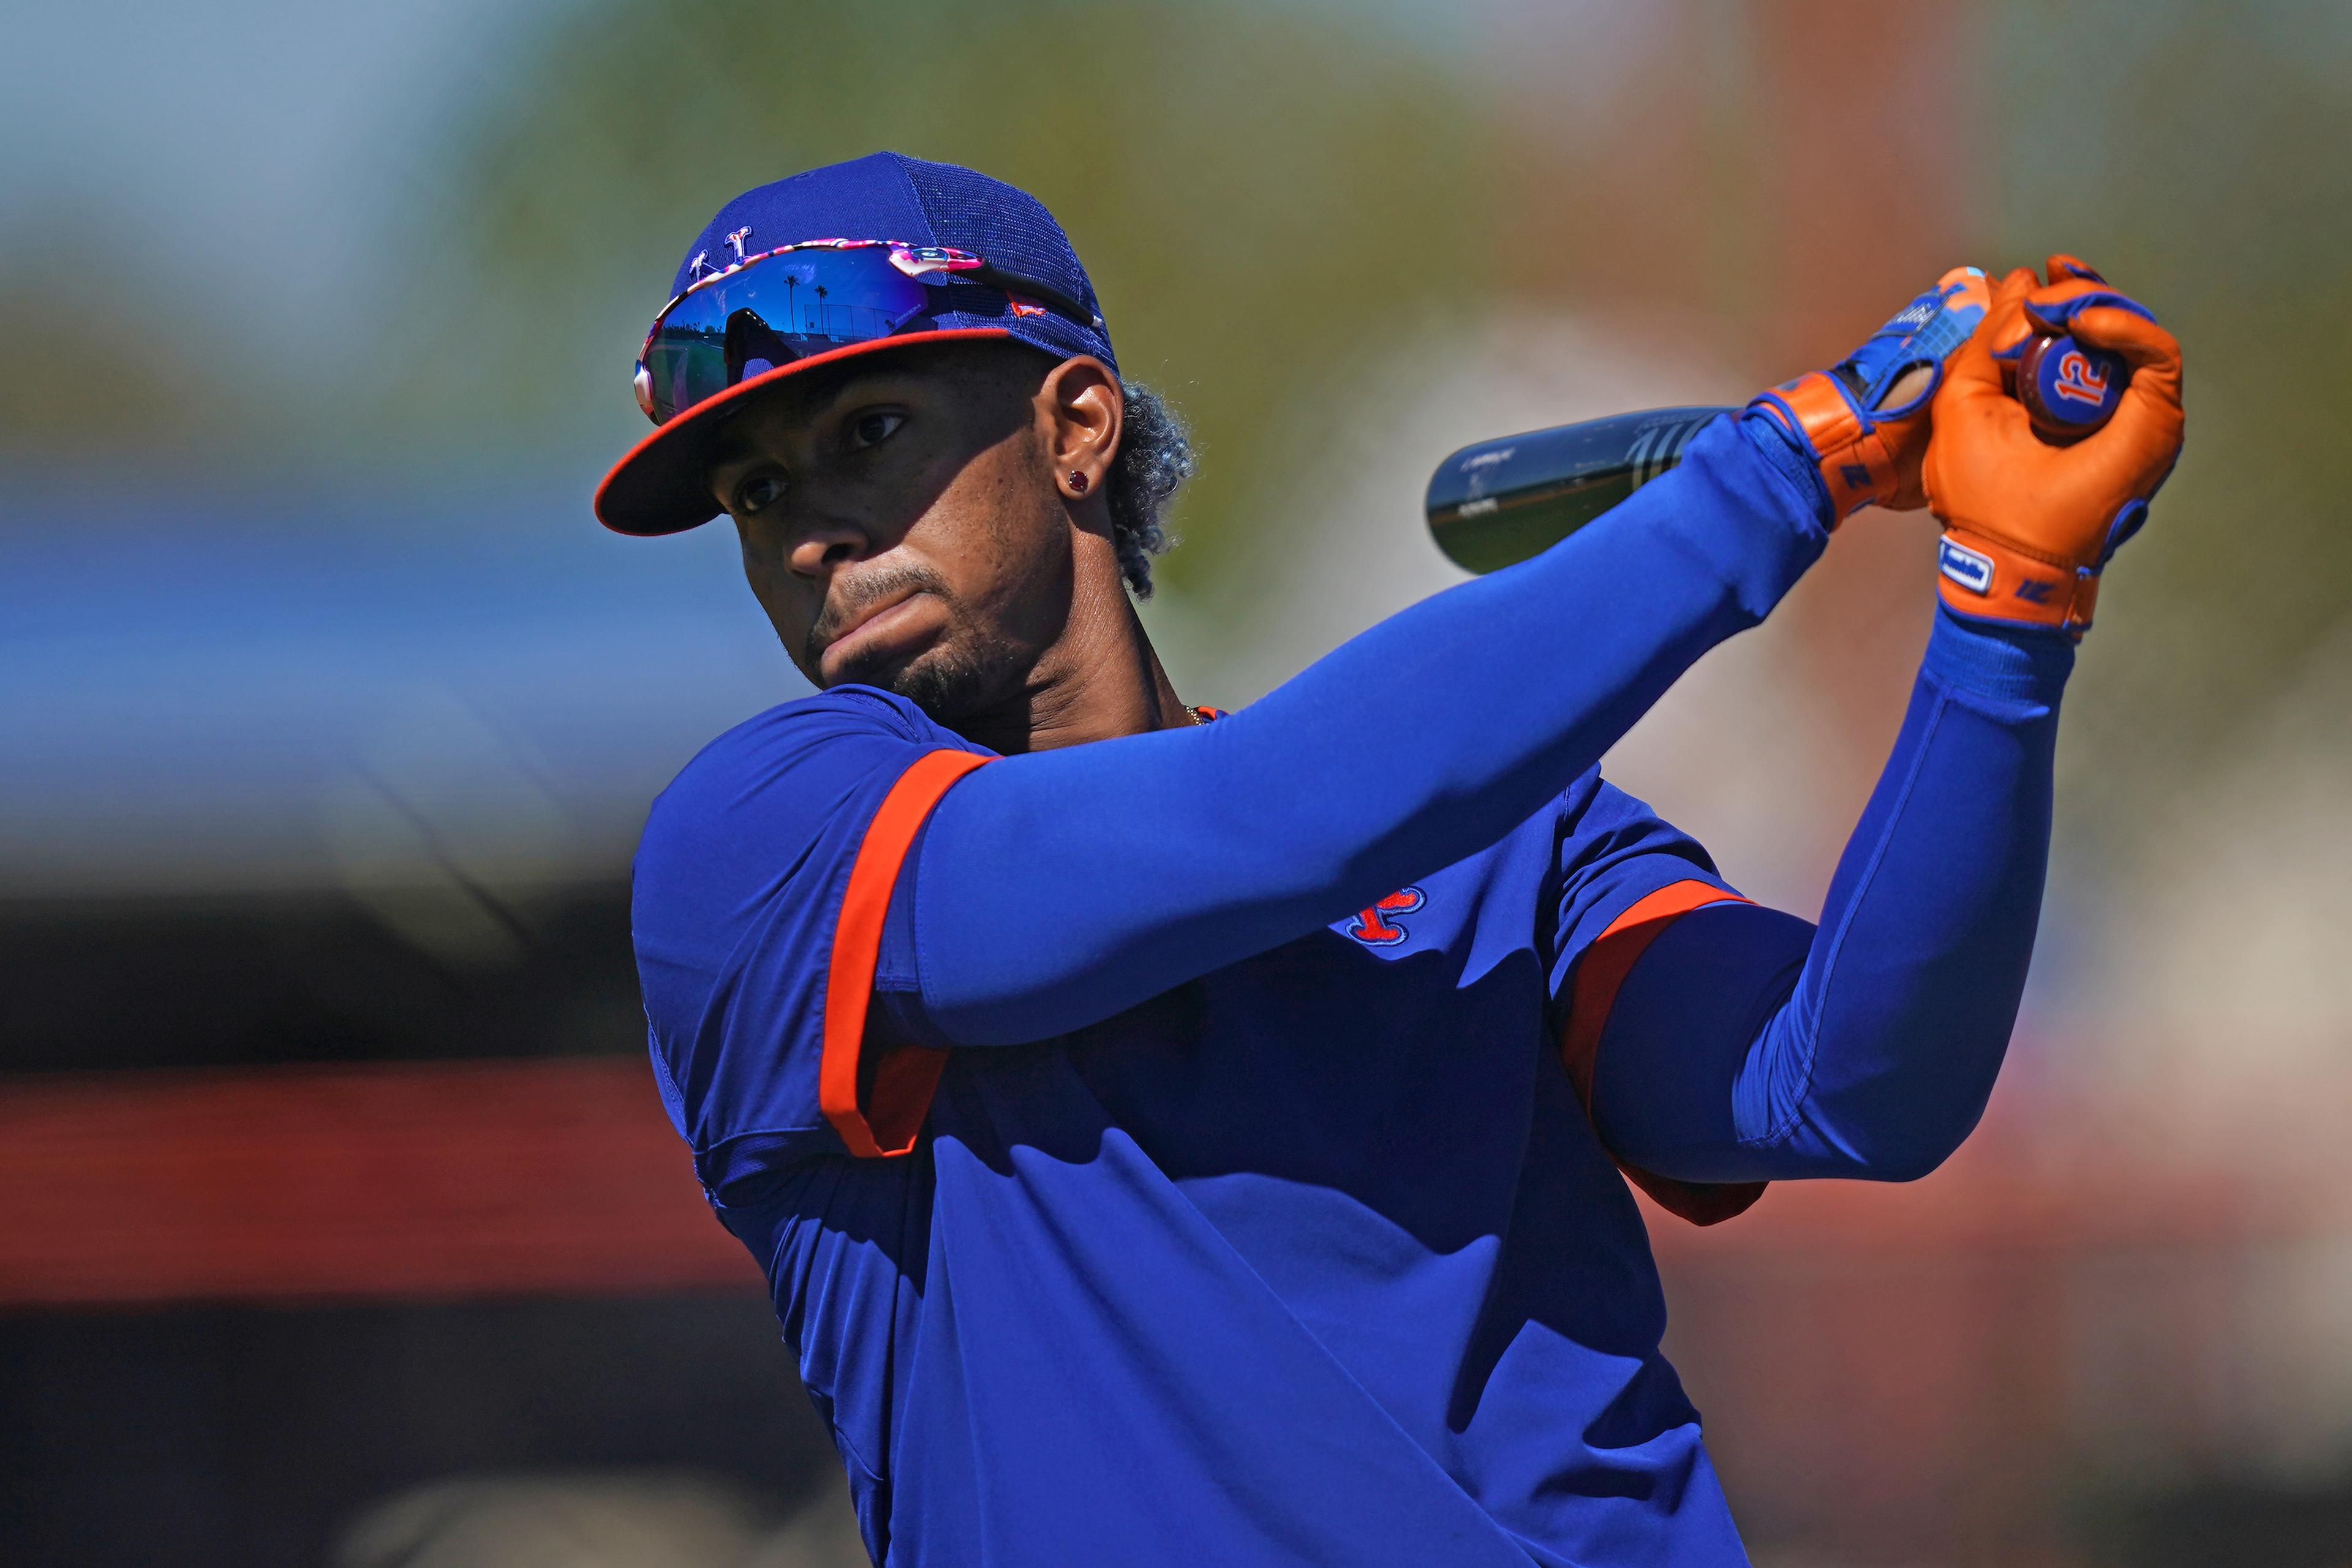 Feb 25, 2021; Port St. Lucie, Florida, USA; New York Mets shortstop Francisco Lindor (12) swings a bat during spring training workouts at Clover Park. / Jasen Vinlove-USA TODAY Sports